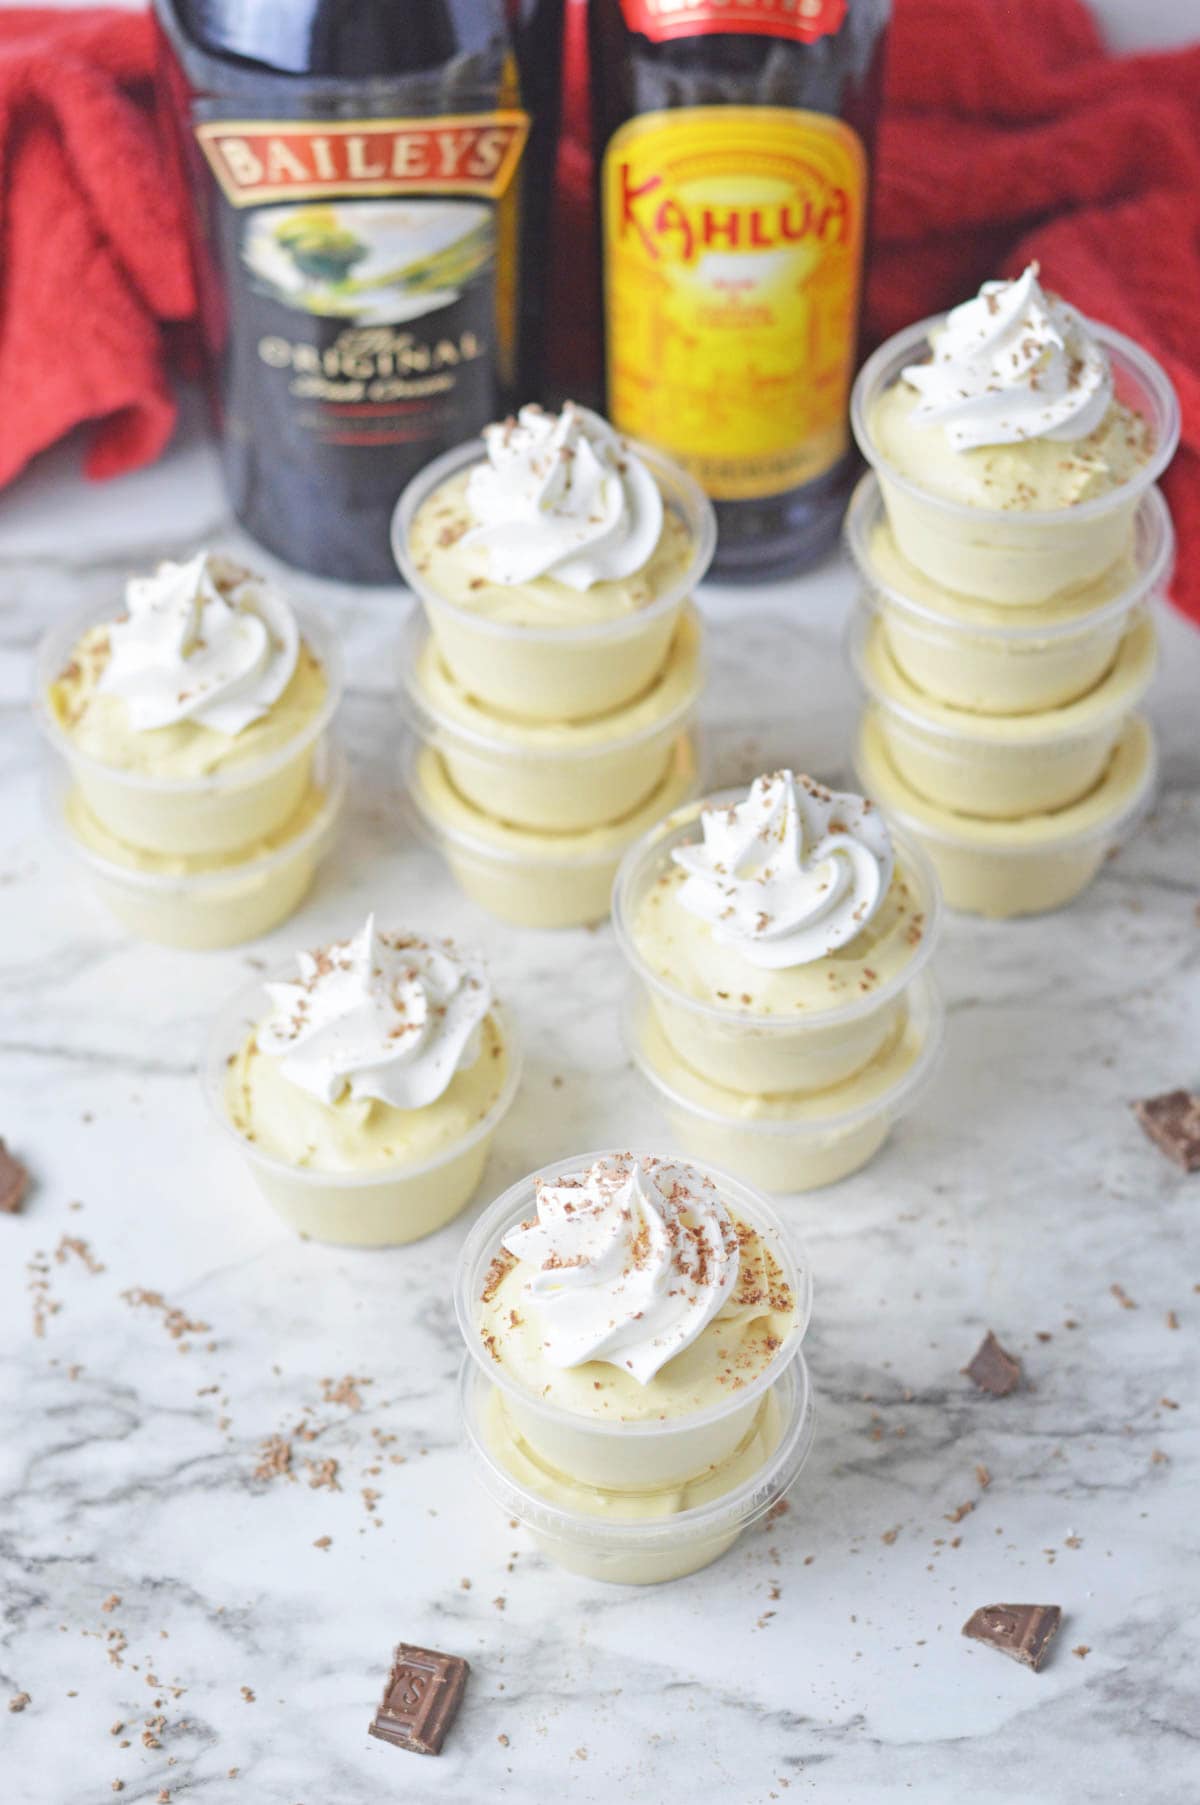 A group of dessert cups with whipped cream and a bottle of bourbon.